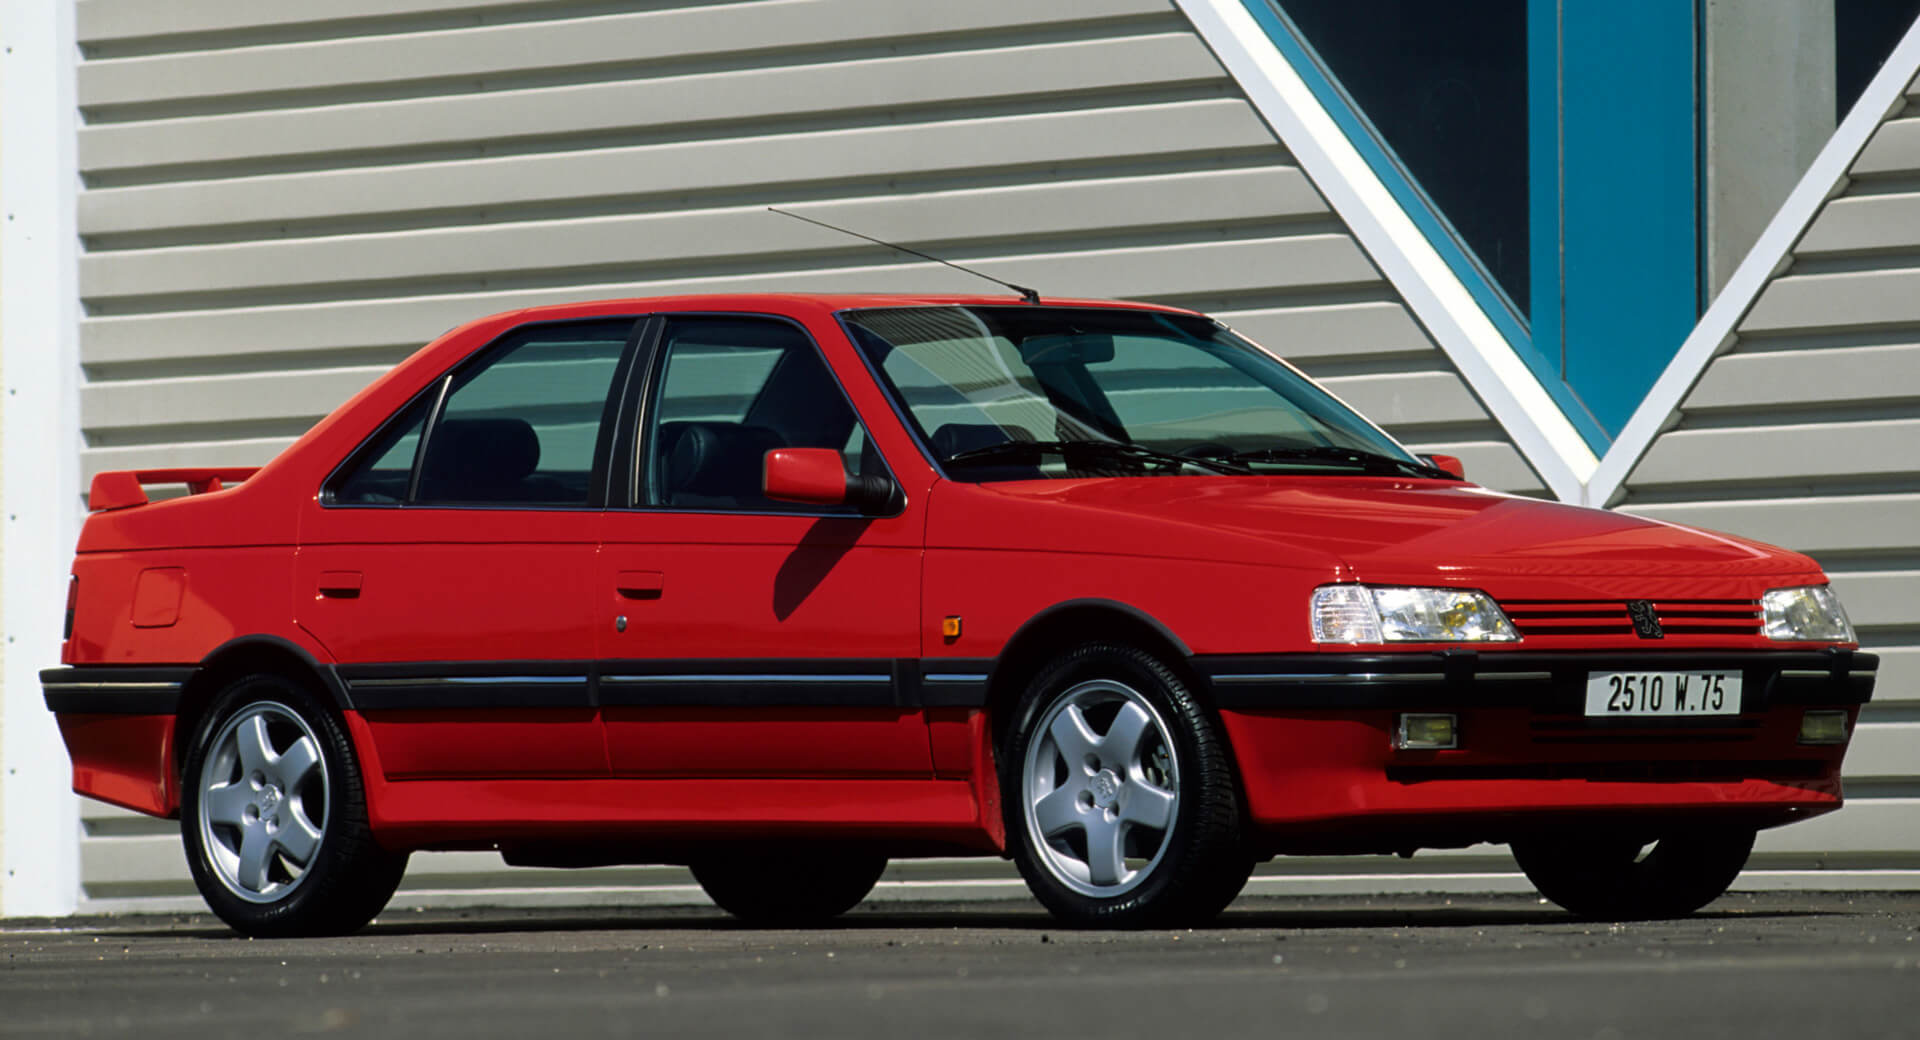 Peugeot 405 T16 Was A Pininfarina-Styled, 220 HP Sports Sedan Of The 1990s | Carscoops